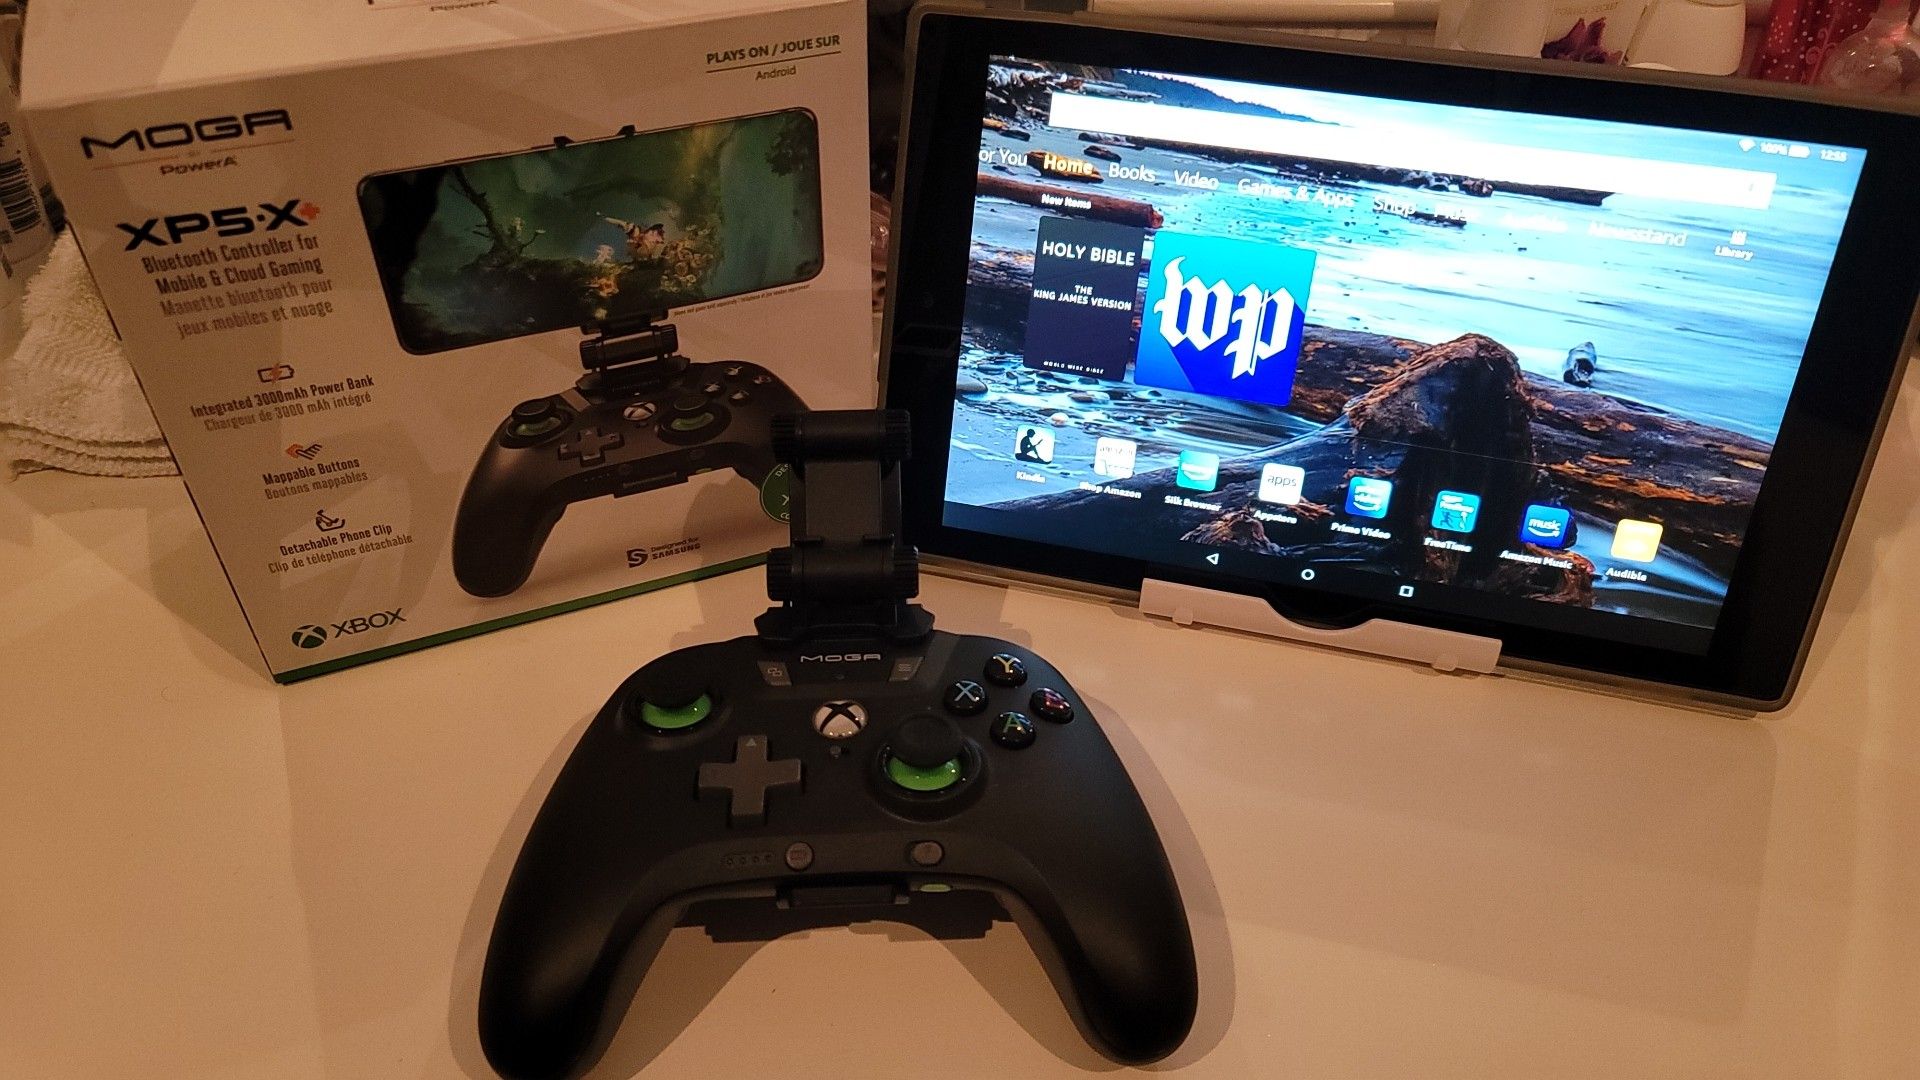 Amazon Fire 🔥 HD Tablet 10" and Moga XP5-X Bluetooth XBOX Controller for mobile and cloud gaming.